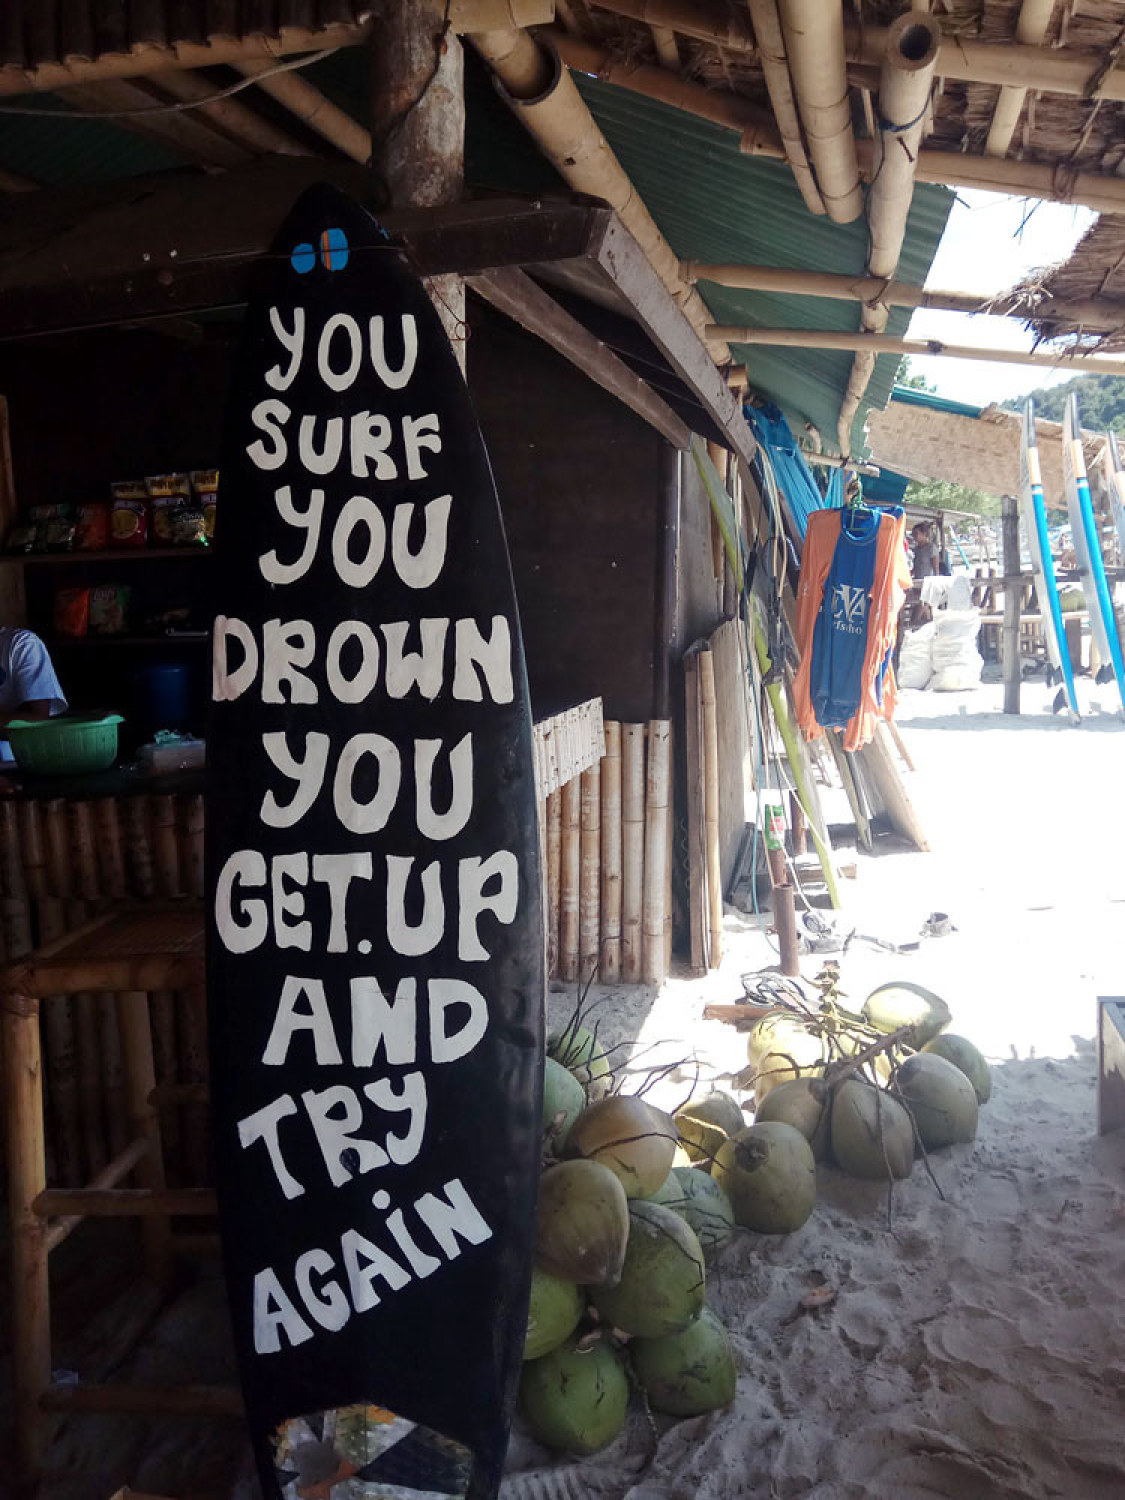 Never give up: A surfboard provides encouragement for new surfers. -/Vyara Wurjanta